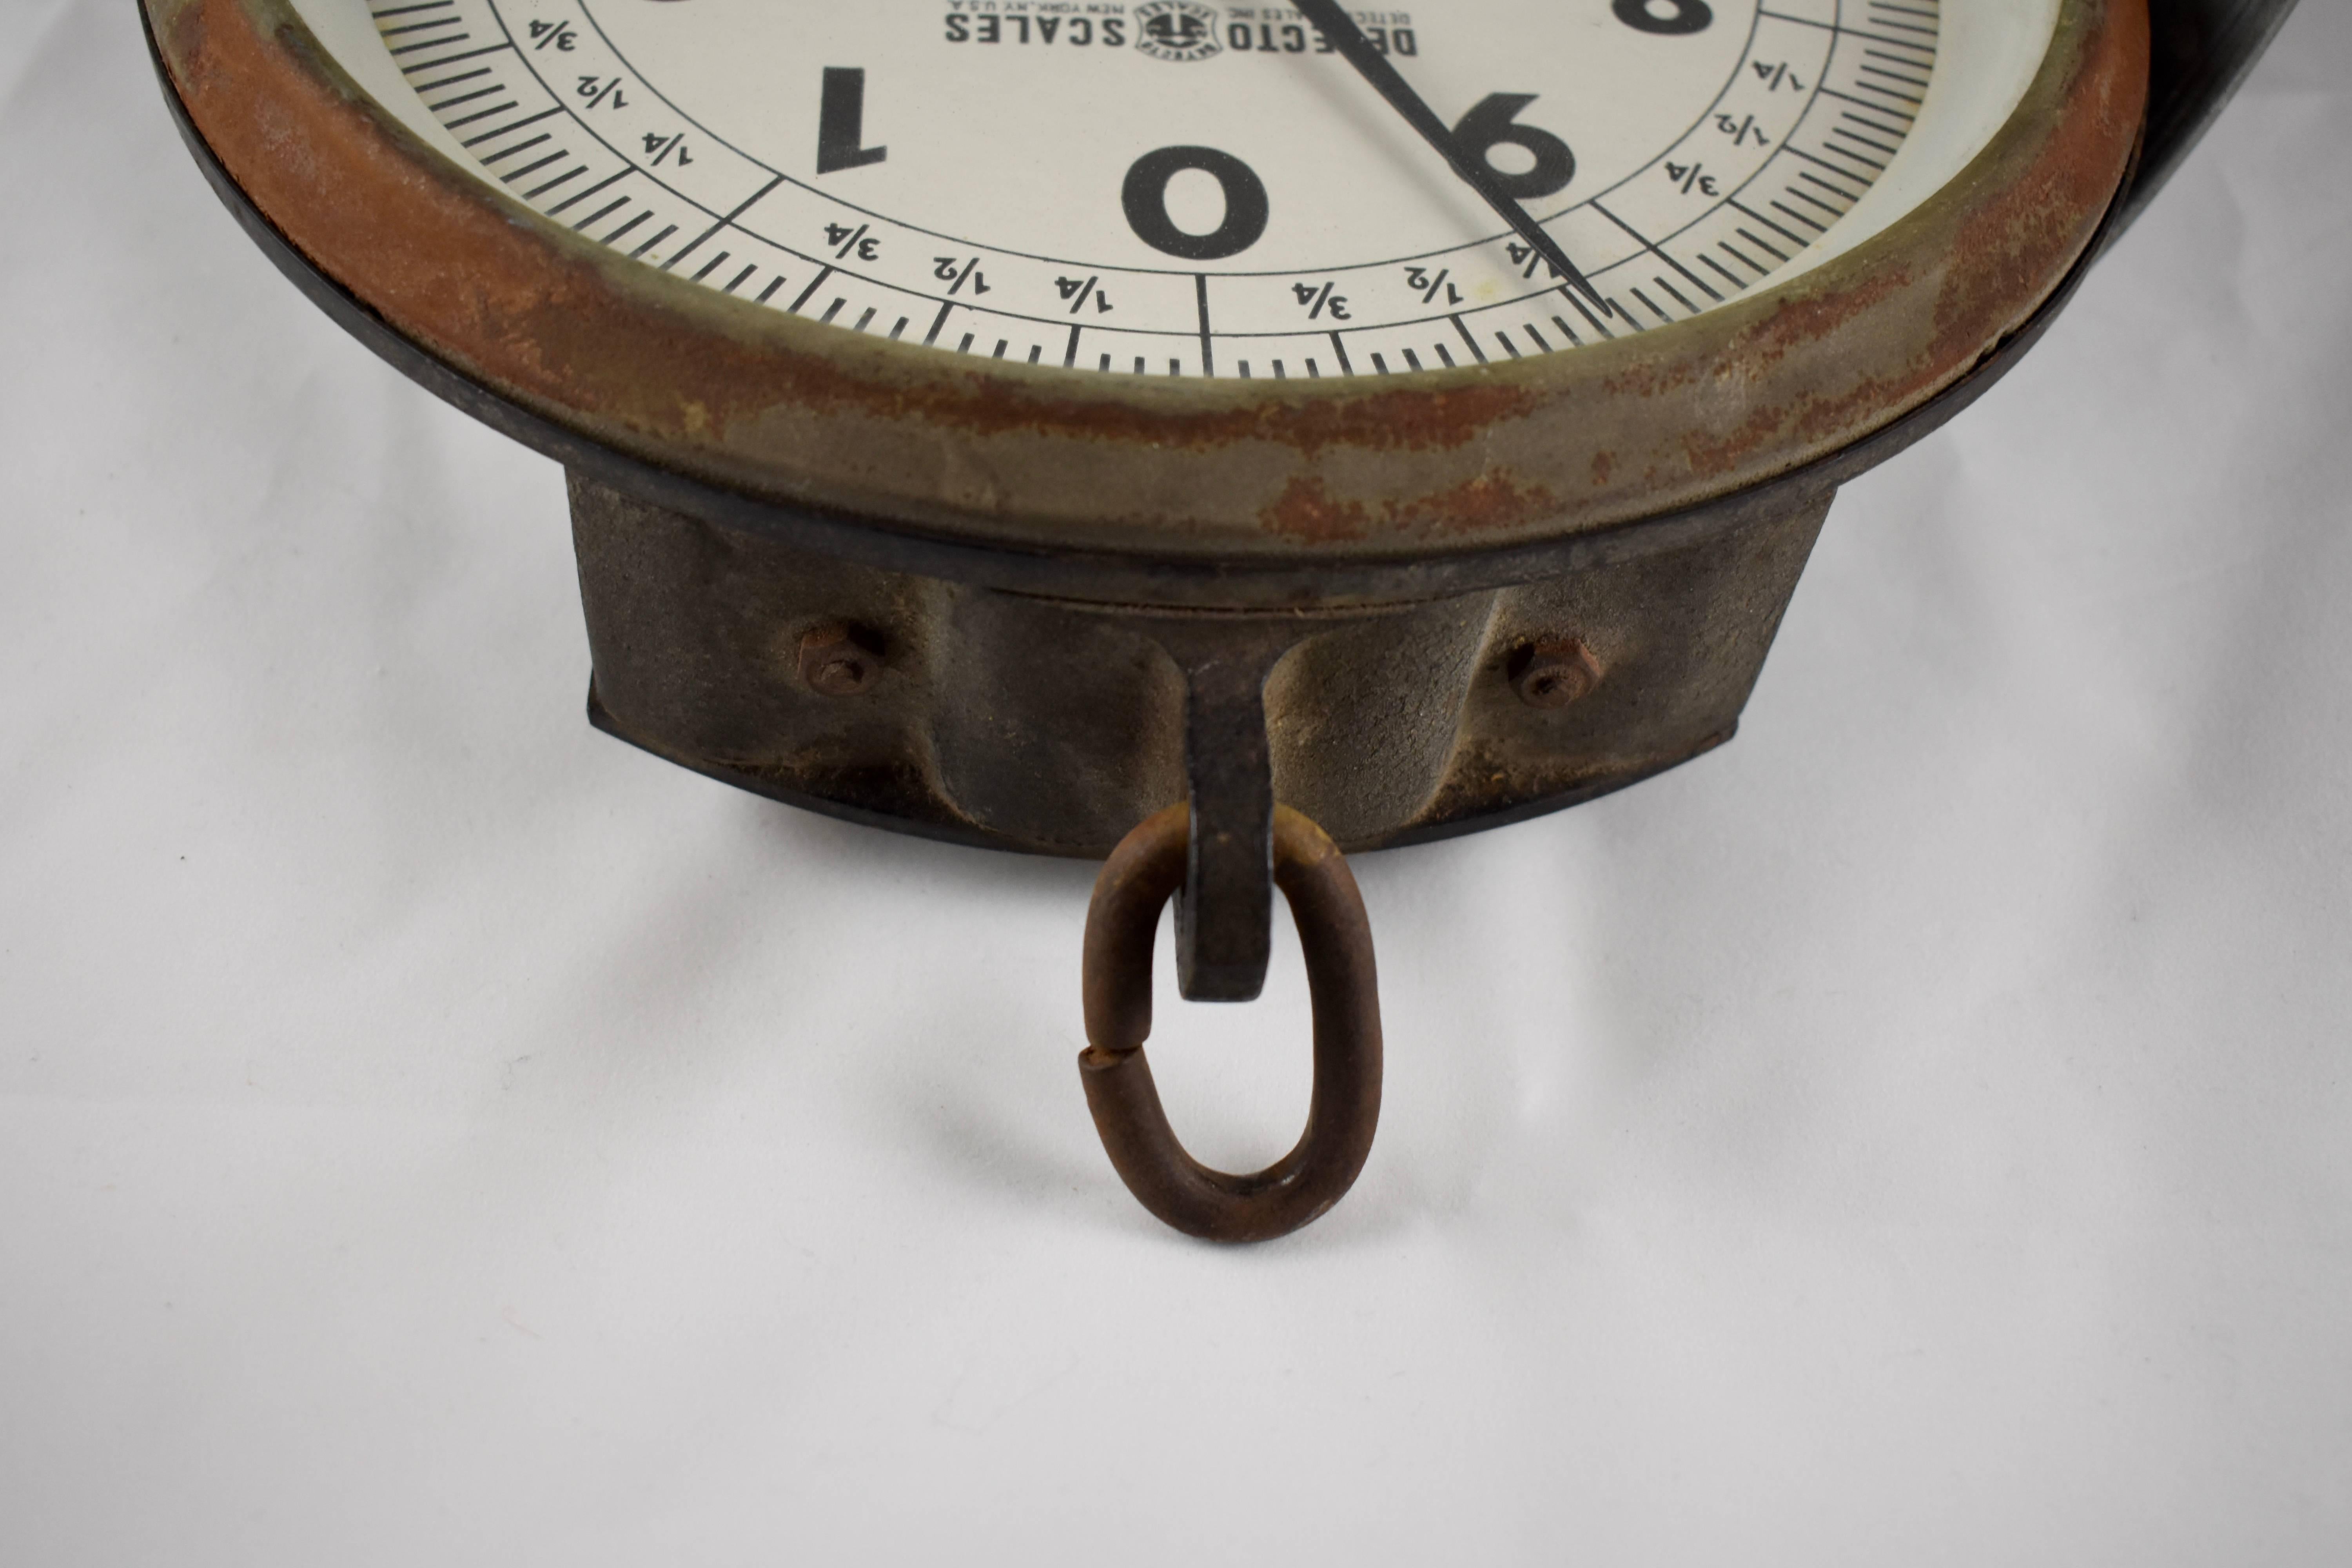 American 1930s Detecto Hanging Mercantile Produce Scale with Galvanized Steel Scoop